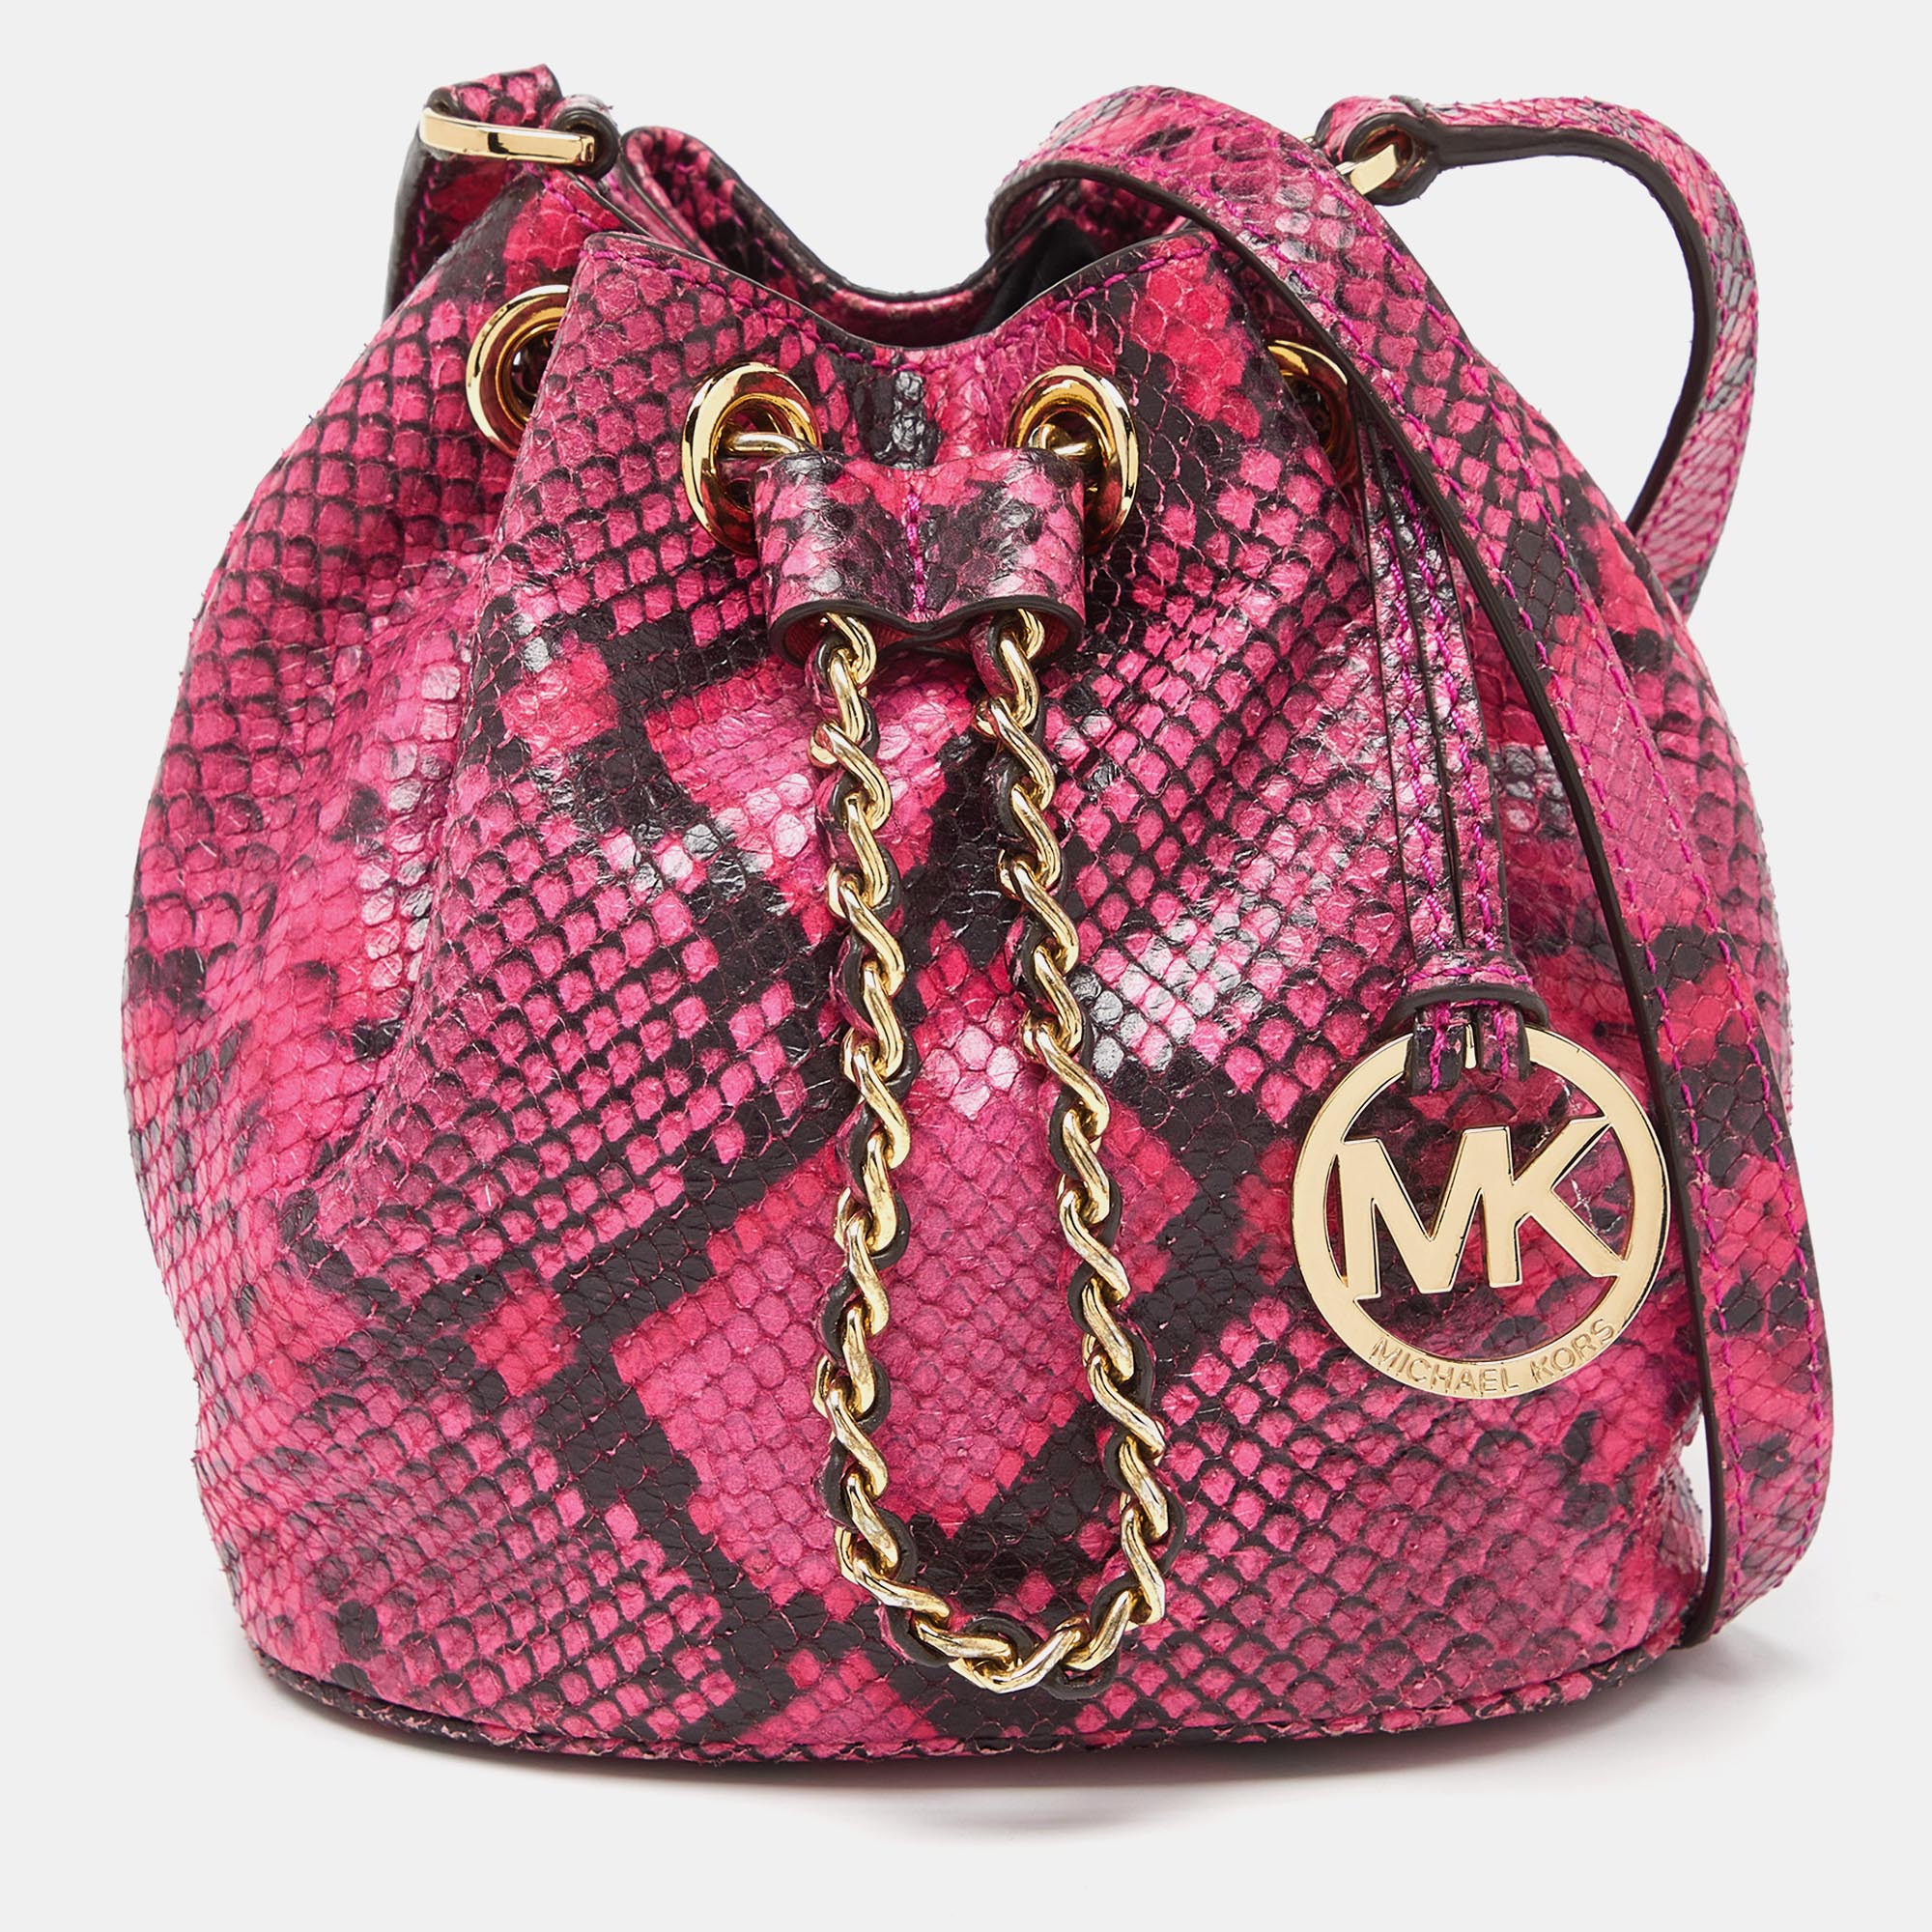 Pre-owned Michael Kors Pink Python Embossed Leather Bucket Bag